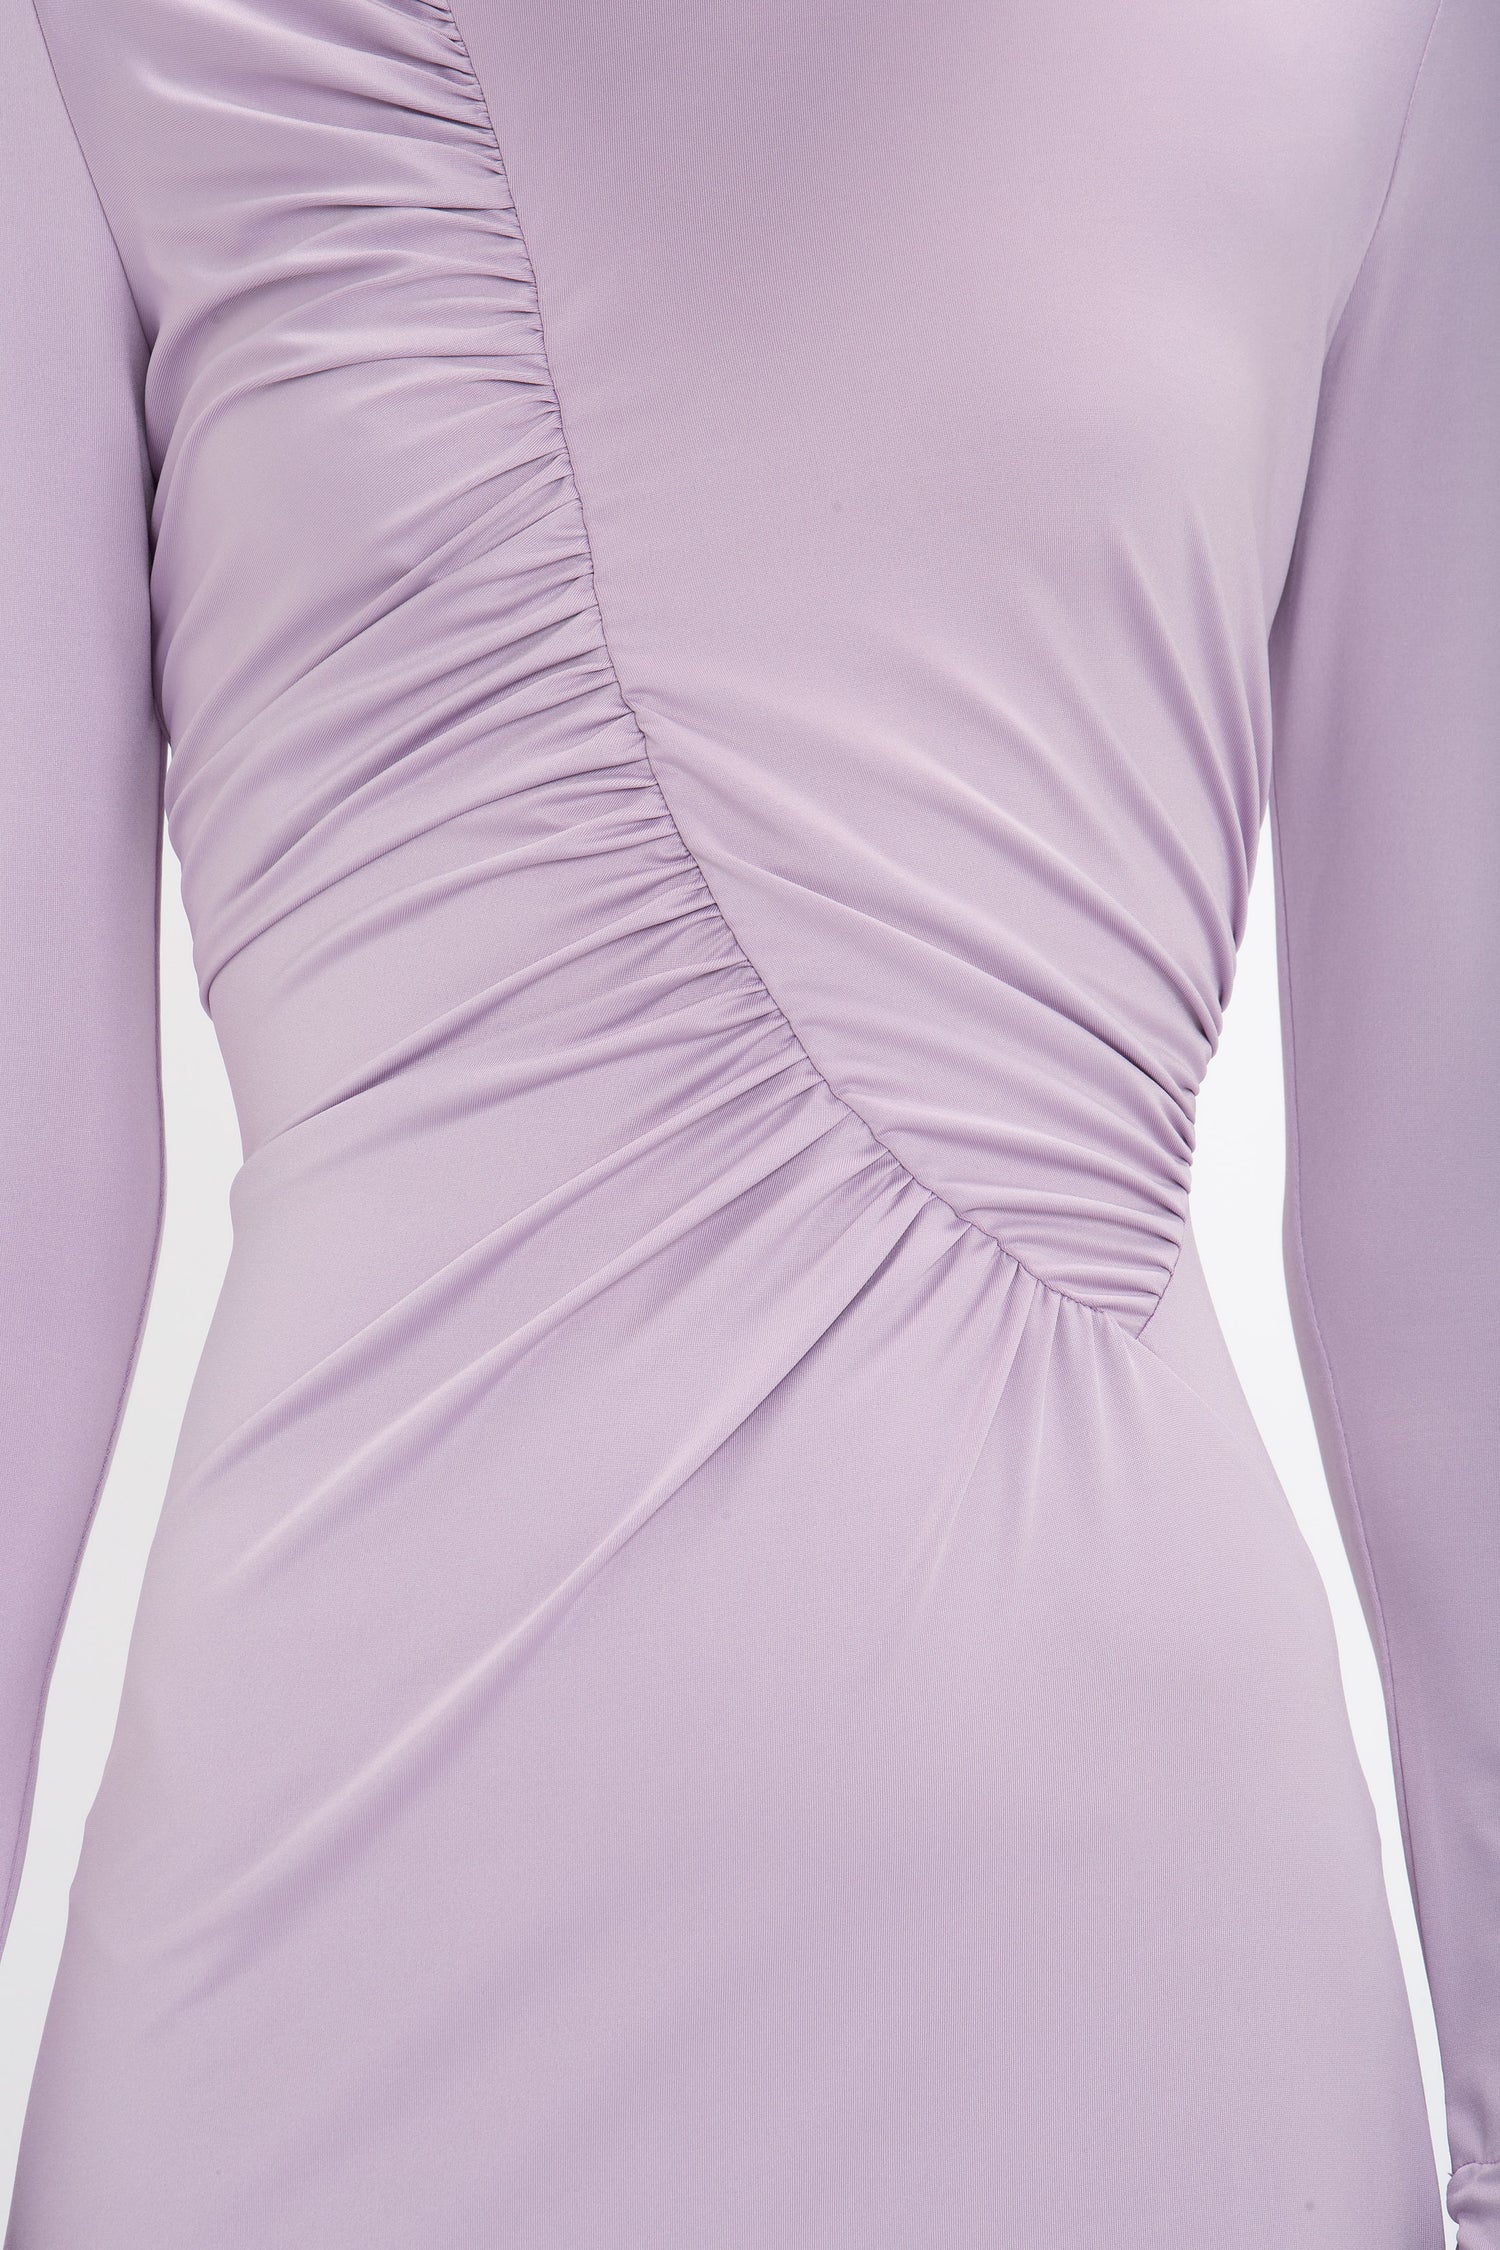 Close-up of a lavender-colored Victoria Beckham Ruched Detail Floor-Length Gown In Petunia with asymmetric ruching on the front. The figure-flattering stretch jersey fabric appears smooth and slightly shiny, exuding an understated glamour.